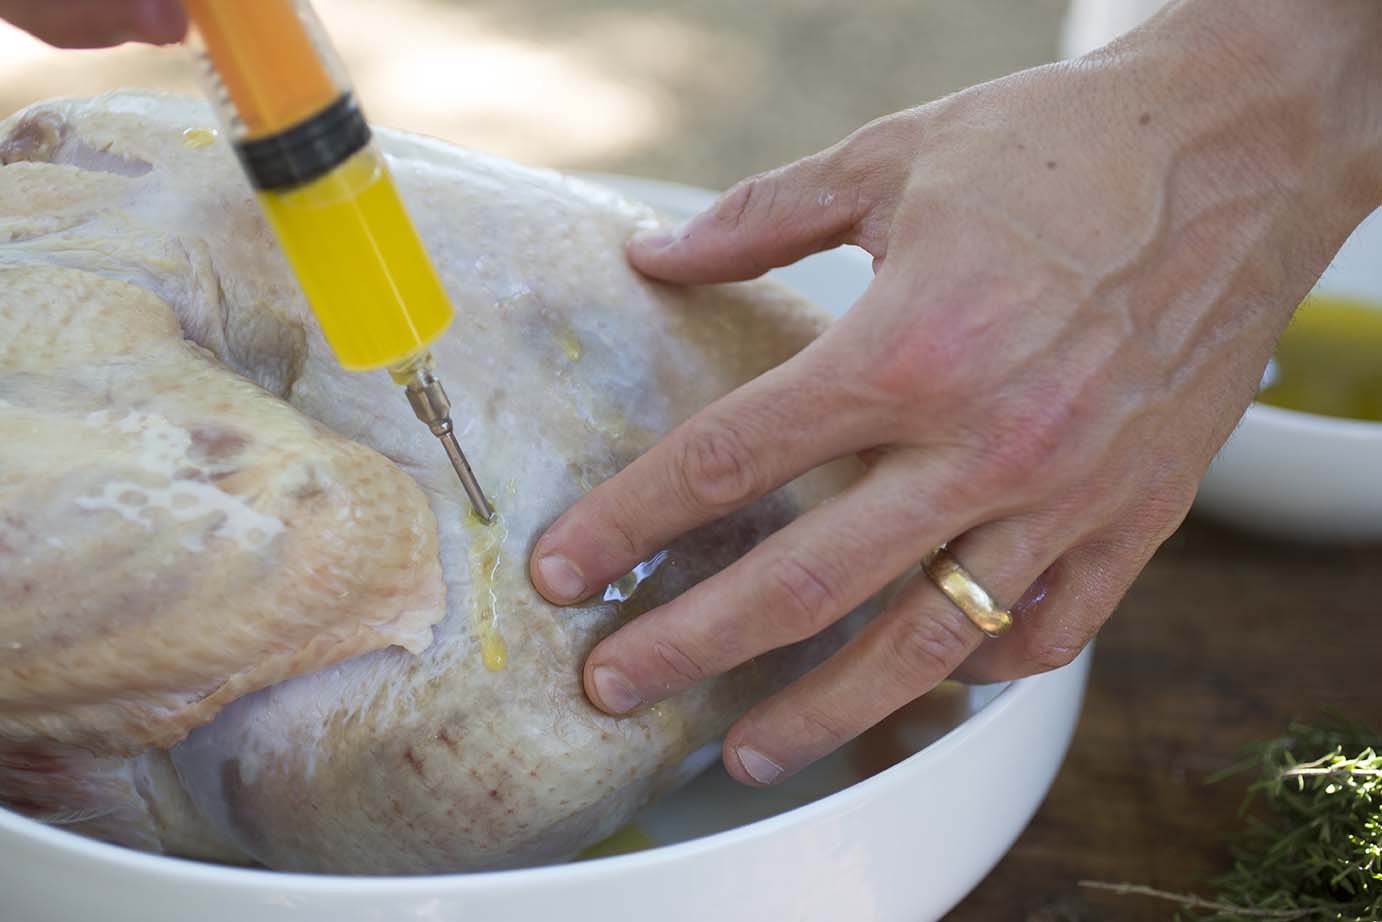 Hands are shown injecting a gold marinate into the turkey